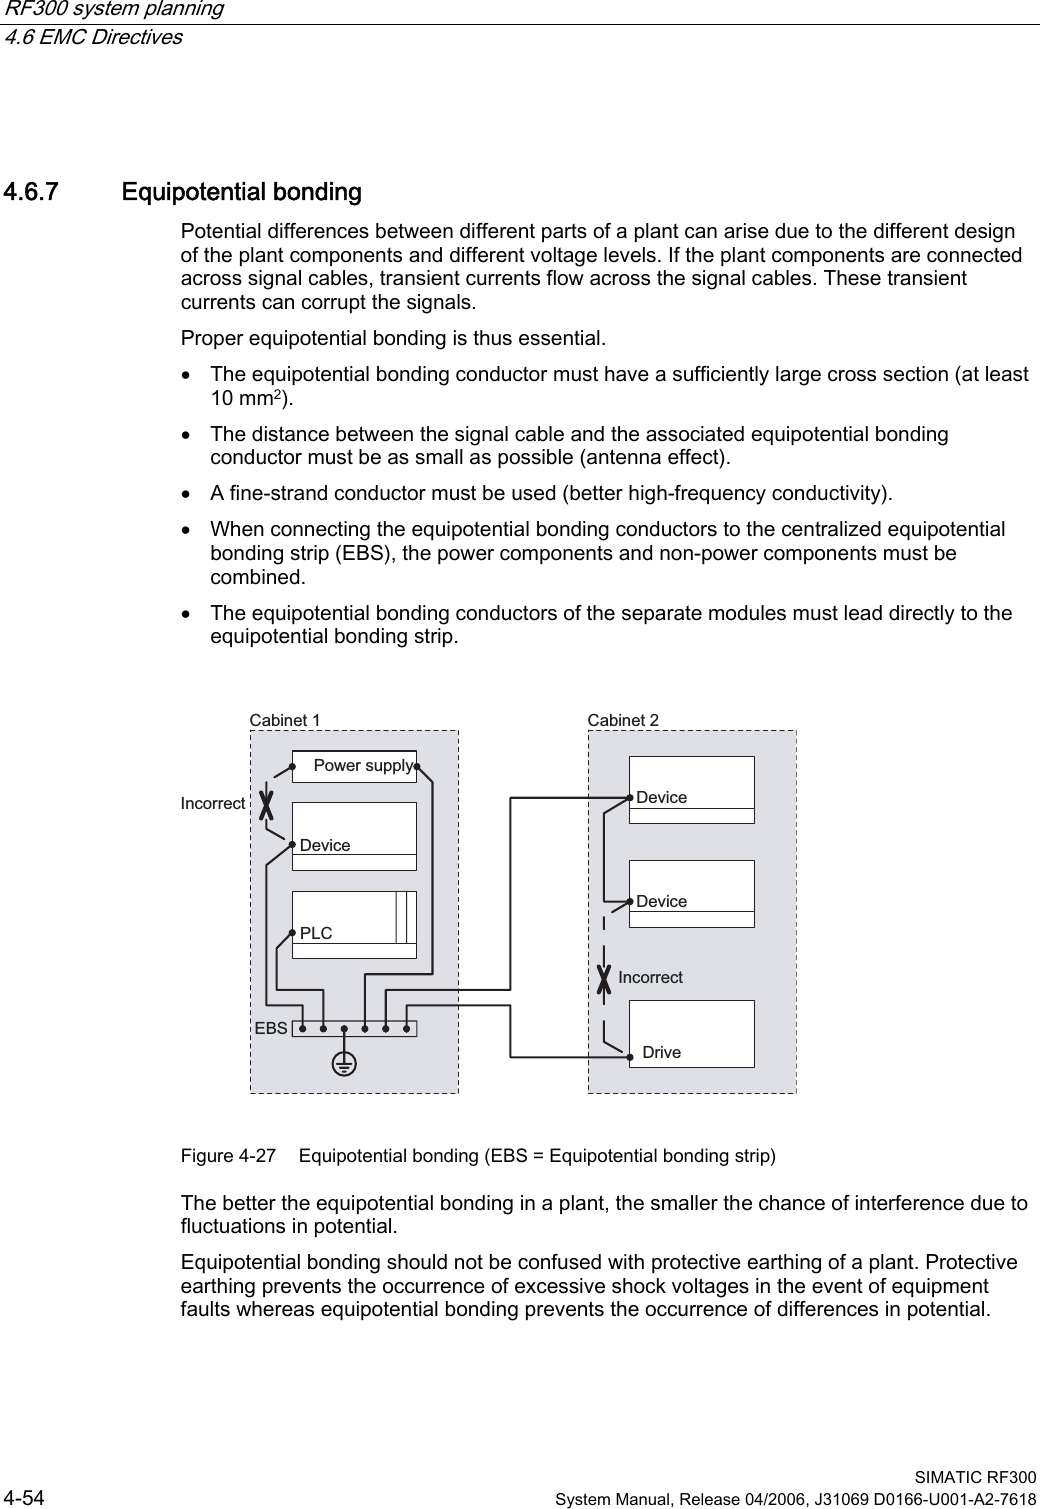 RF300 system planning   4.6 EMC Directives  SIMATIC RF300 4-54  System Manual, Release 04/2006, J31069 D0166-U001-A2-7618 4.6.7  Equipotential bonding Potential differences between different parts of a plant can arise due to the different design of the plant components and different voltage levels. If the plant components are connected across signal cables, transient currents flow across the signal cables. These transient currents can corrupt the signals. Proper equipotential bonding is thus essential.  • The equipotential bonding conductor must have a sufficiently large cross section (at least 10 mm2). • The distance between the signal cable and the associated equipotential bonding conductor must be as small as possible (antenna effect). • A fine-strand conductor must be used (better high-frequency conductivity). • When connecting the equipotential bonding conductors to the centralized equipotential bonding strip (EBS), the power components and non-power components must be combined. • The equipotential bonding conductors of the separate modules must lead directly to the equipotential bonding strip.  &amp;DELQHW &amp;DELQHW,QFRUUHFW3RZHUVXSSO\&apos;ULYH&apos;HYLFH3/&amp;(%6&apos;HYLFH&apos;HYLFH,QFRUUHFW Figure 4-27  Equipotential bonding (EBS = Equipotential bonding strip) The better the equipotential bonding in a plant, the smaller the chance of interference due to fluctuations in potential. Equipotential bonding should not be confused with protective earthing of a plant. Protective earthing prevents the occurrence of excessive shock voltages in the event of equipment faults whereas equipotential bonding prevents the occurrence of differences in potential. 